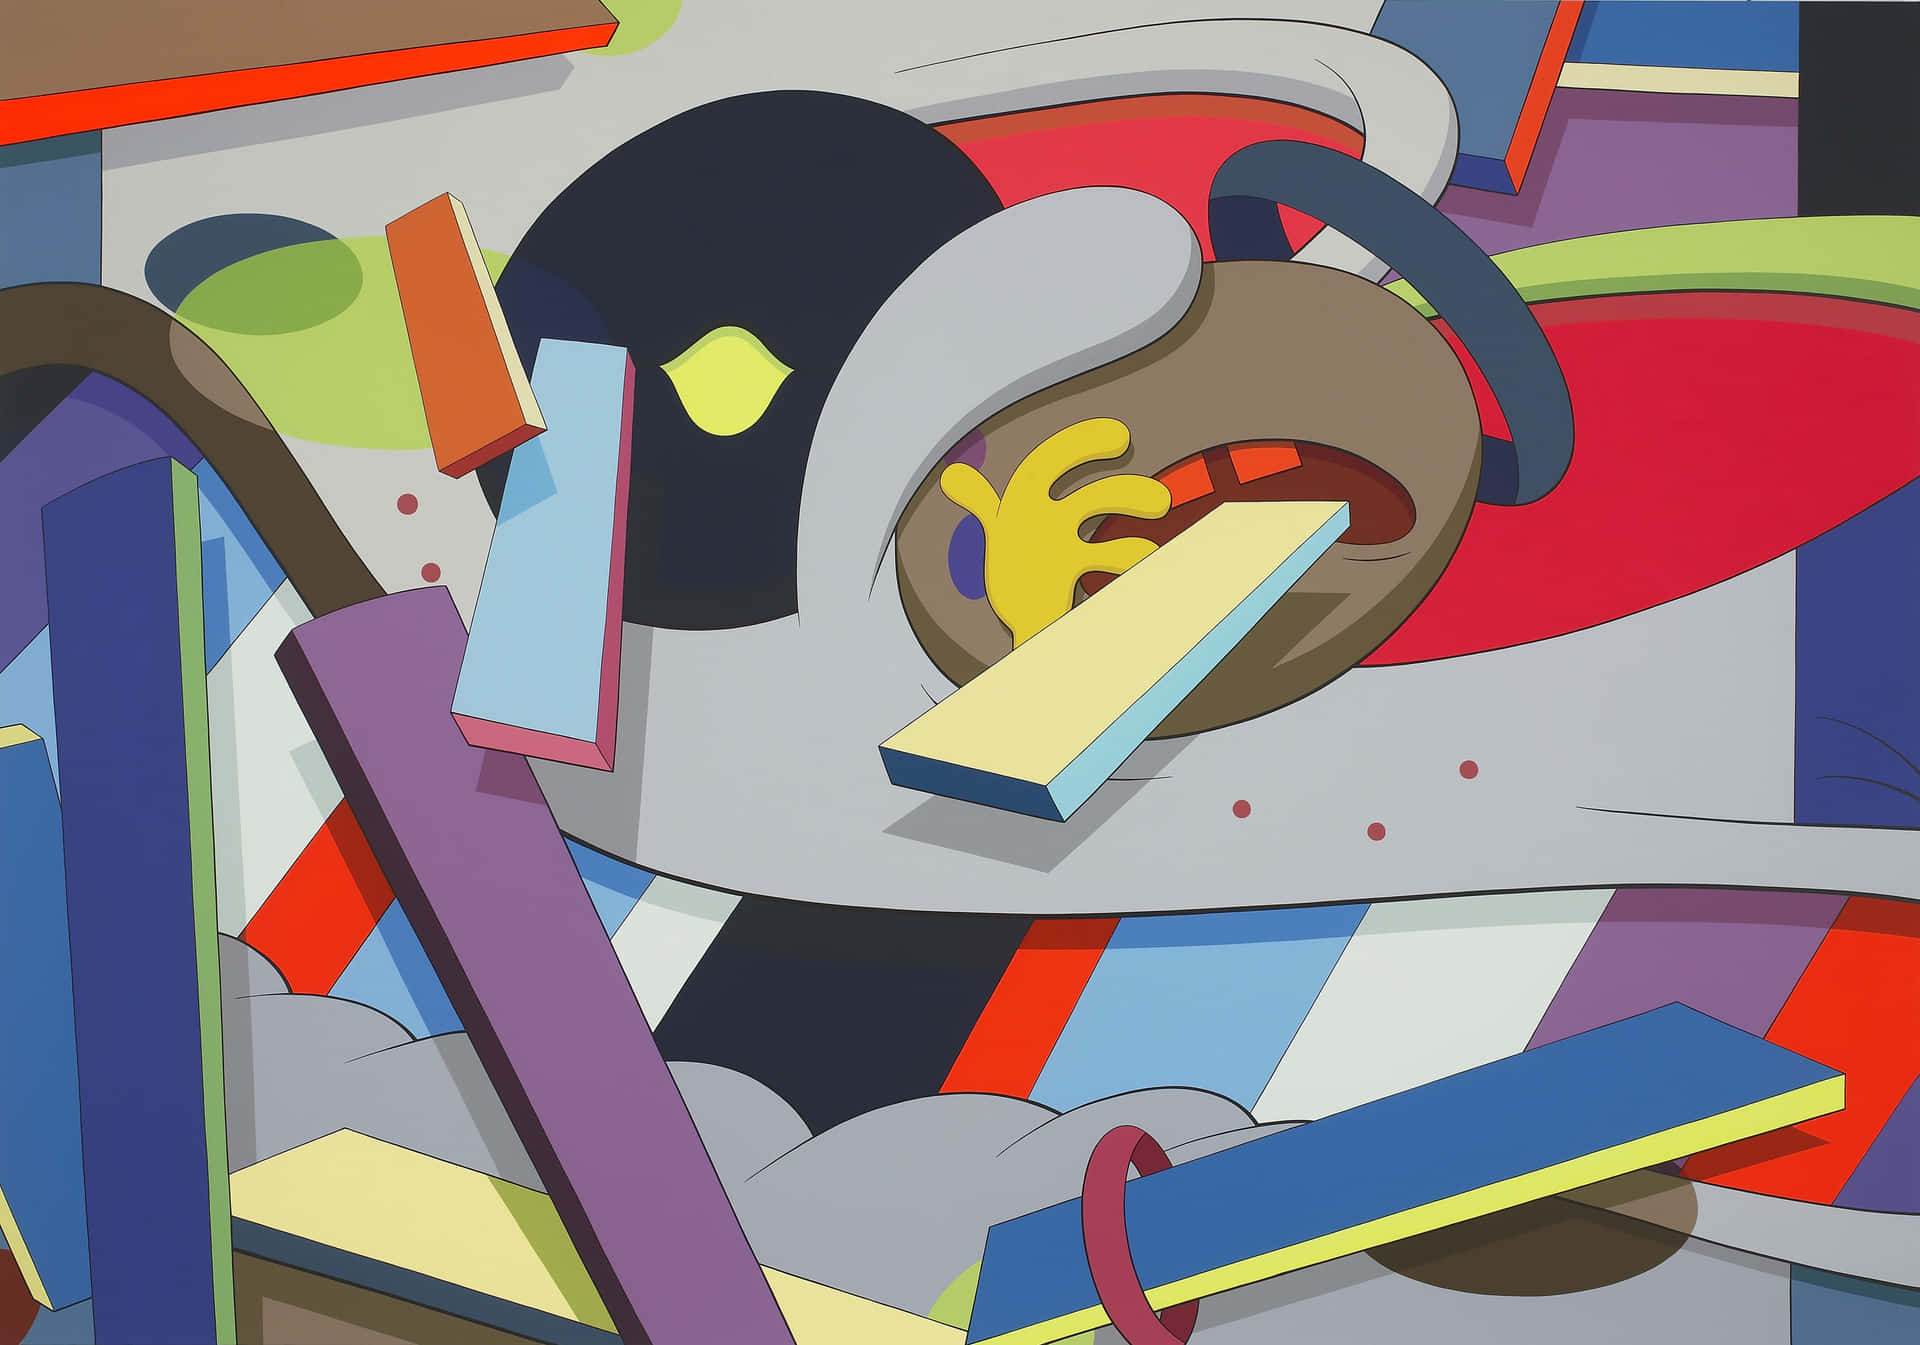 KAWS art takes on a life of its own Wallpaper